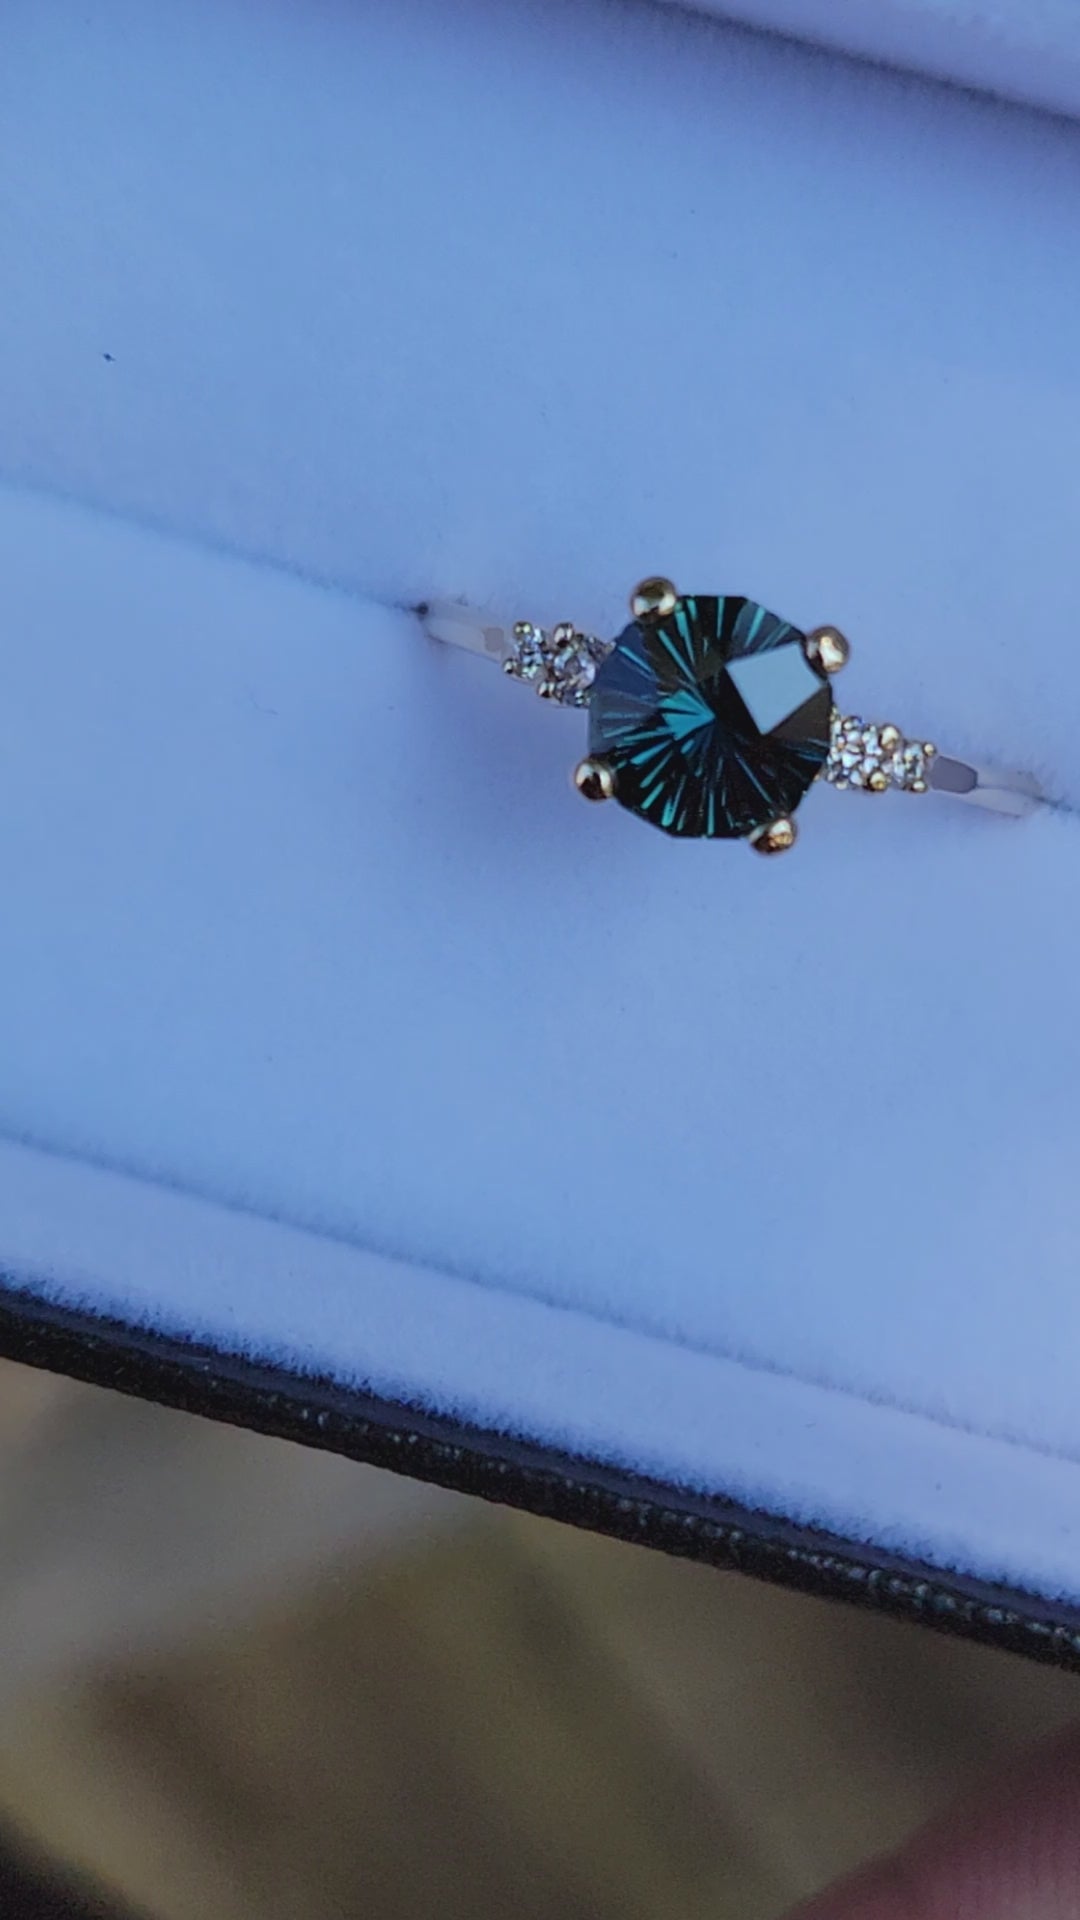 Five Stone Diamond Accented Multi Prong Setting - Depicted with a Teal Sapphire (Setting Only, Center Stone Sold Separately)